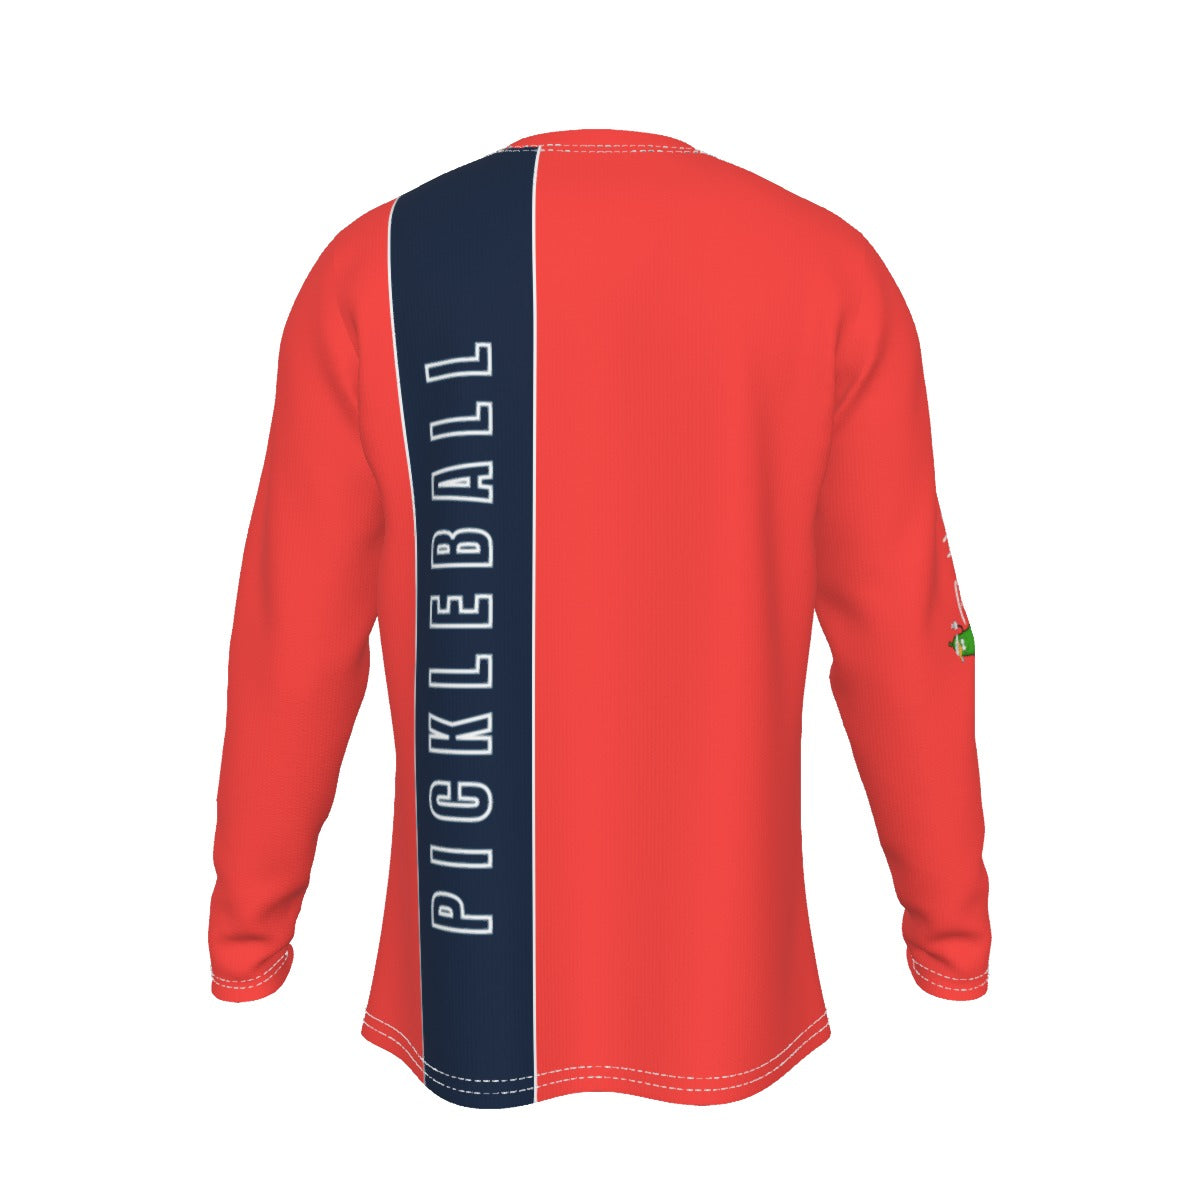 PICKLEBALL - Coral/Navy Blue - Men's Long Sleeve T-Shirt by Dizzy Pickle